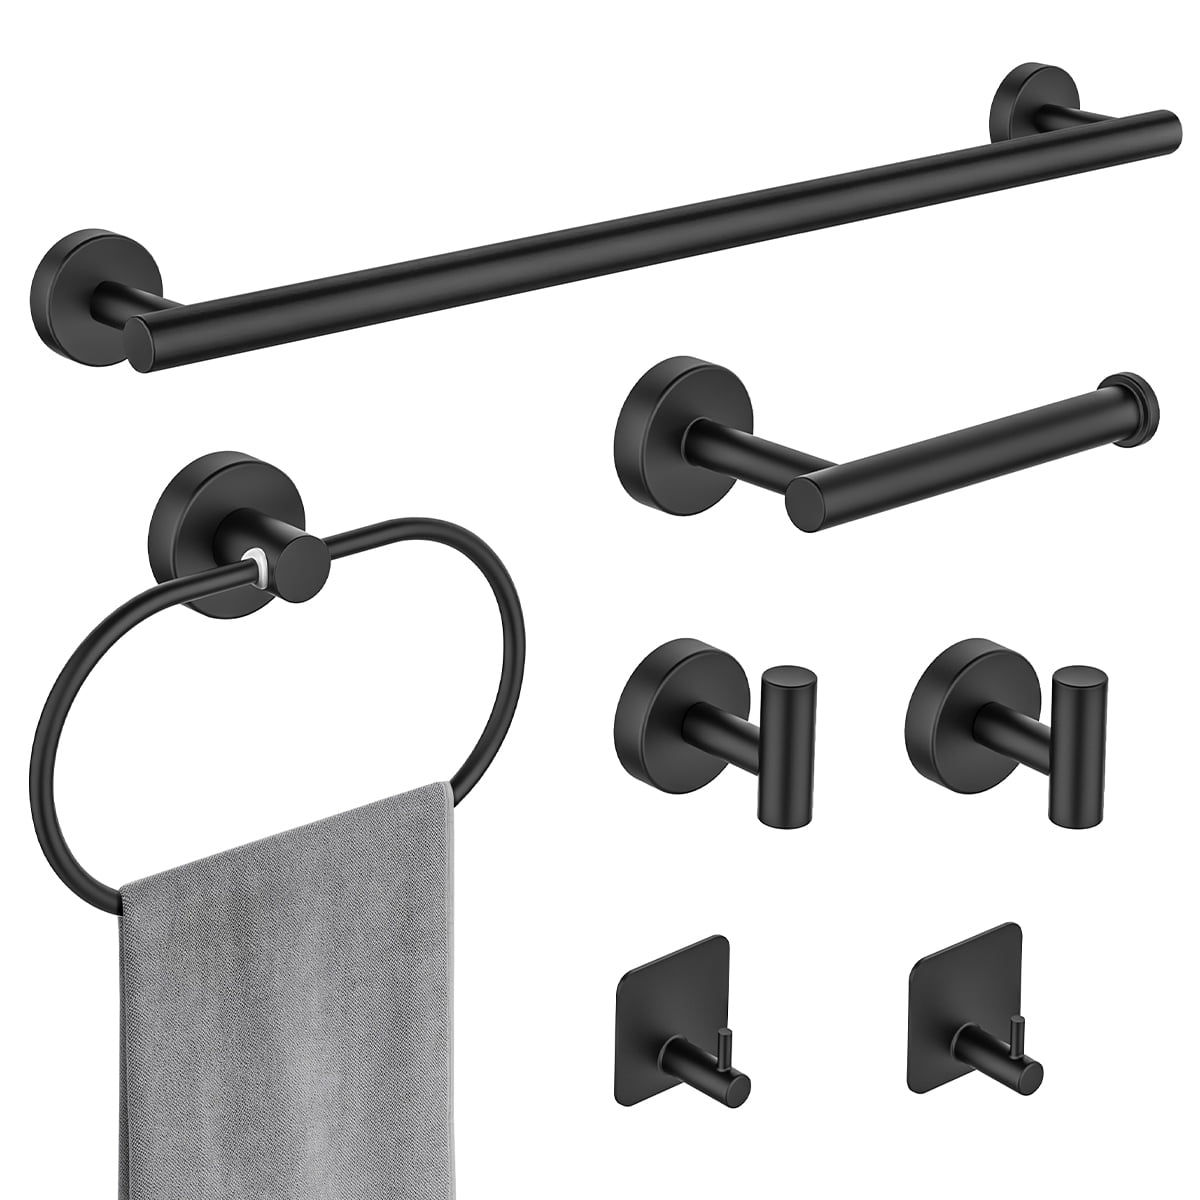 Acehoom 4-Piece Bath Hardware Set with 17 in. Towel Bar Towel Ring Toilet Paper Holder and Towel Hook in Matte Black